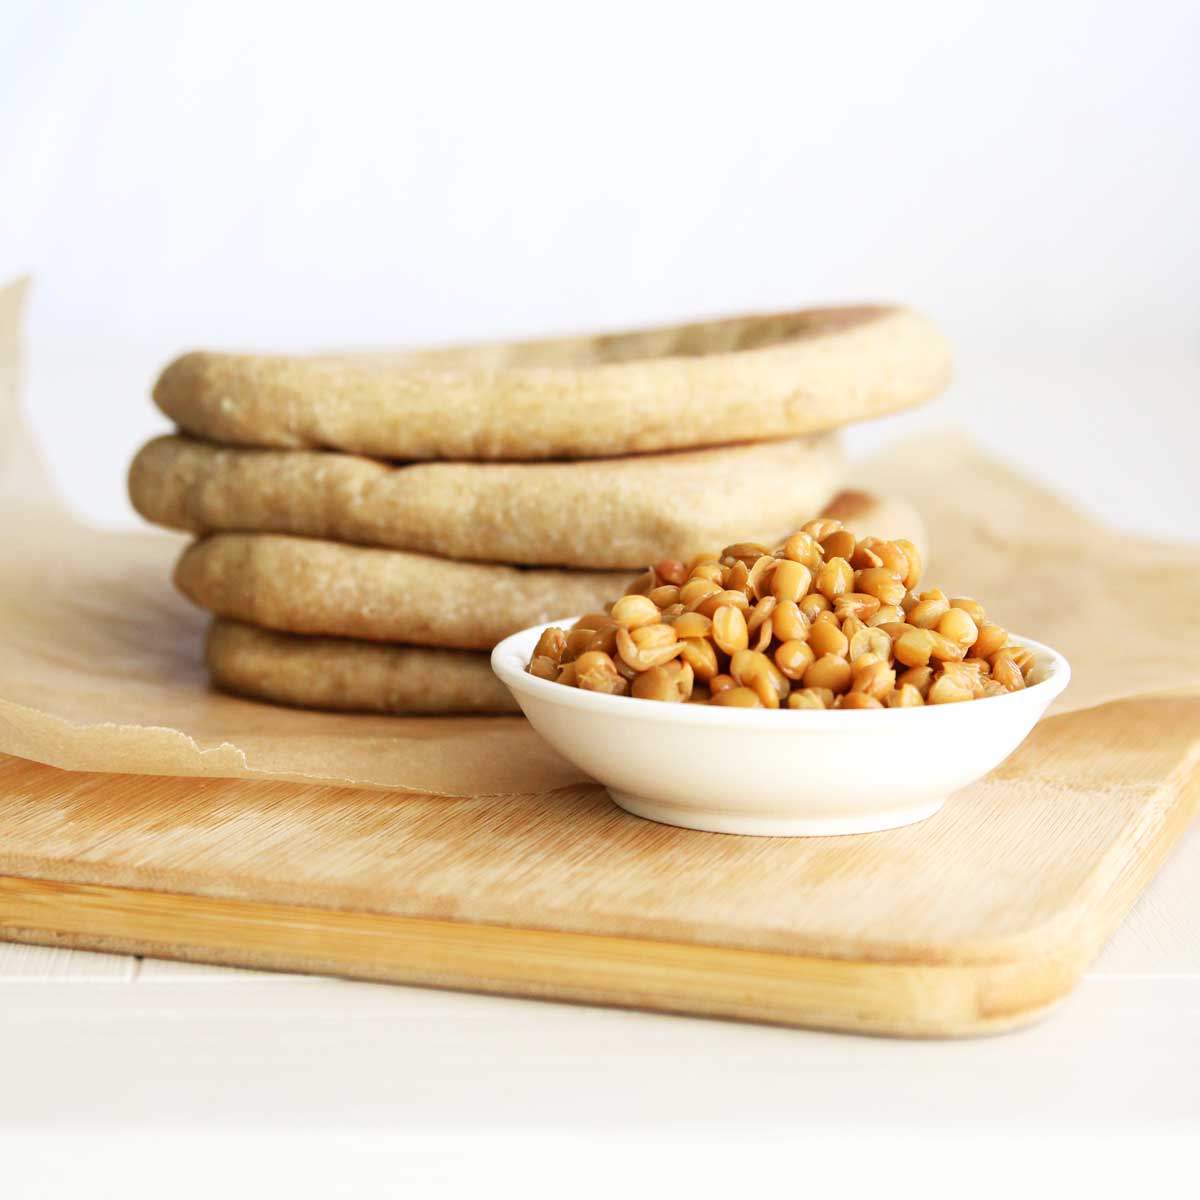 Chickpea Naan - Lower Carb Flatbread Made in the Food Processor - Chickpea Naan